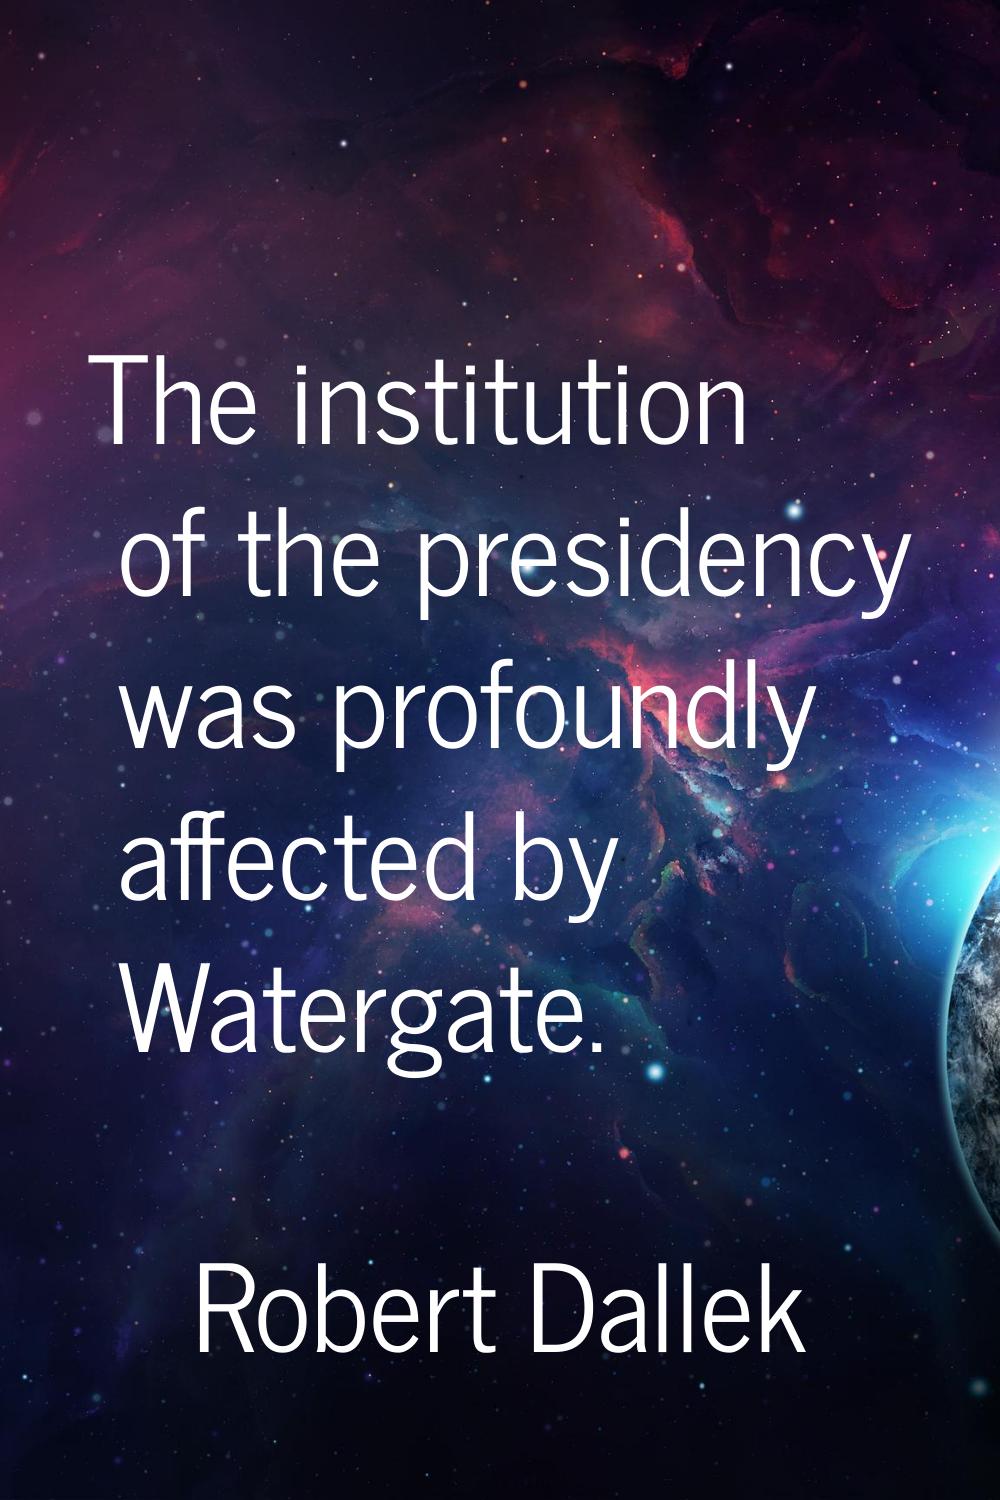 The institution of the presidency was profoundly affected by Watergate.